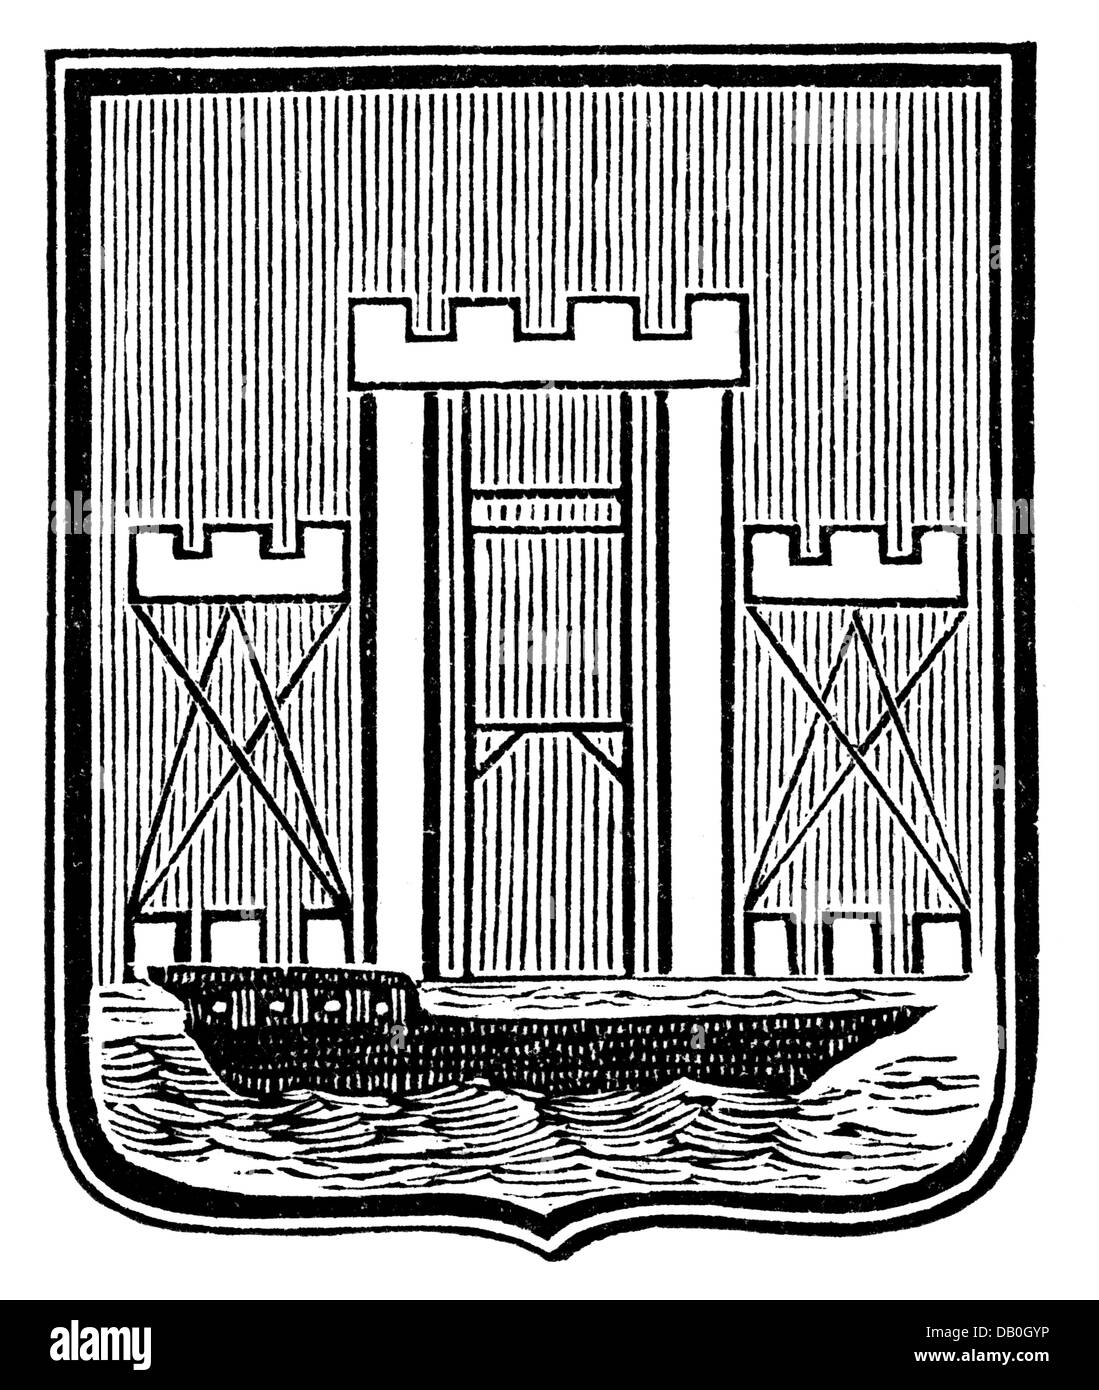 heraldry, coat of arms, Lithuania, city arms, Klaipeda, wood engraving, 1893, Additional-Rights-Clearences-Not Available Stock Photo